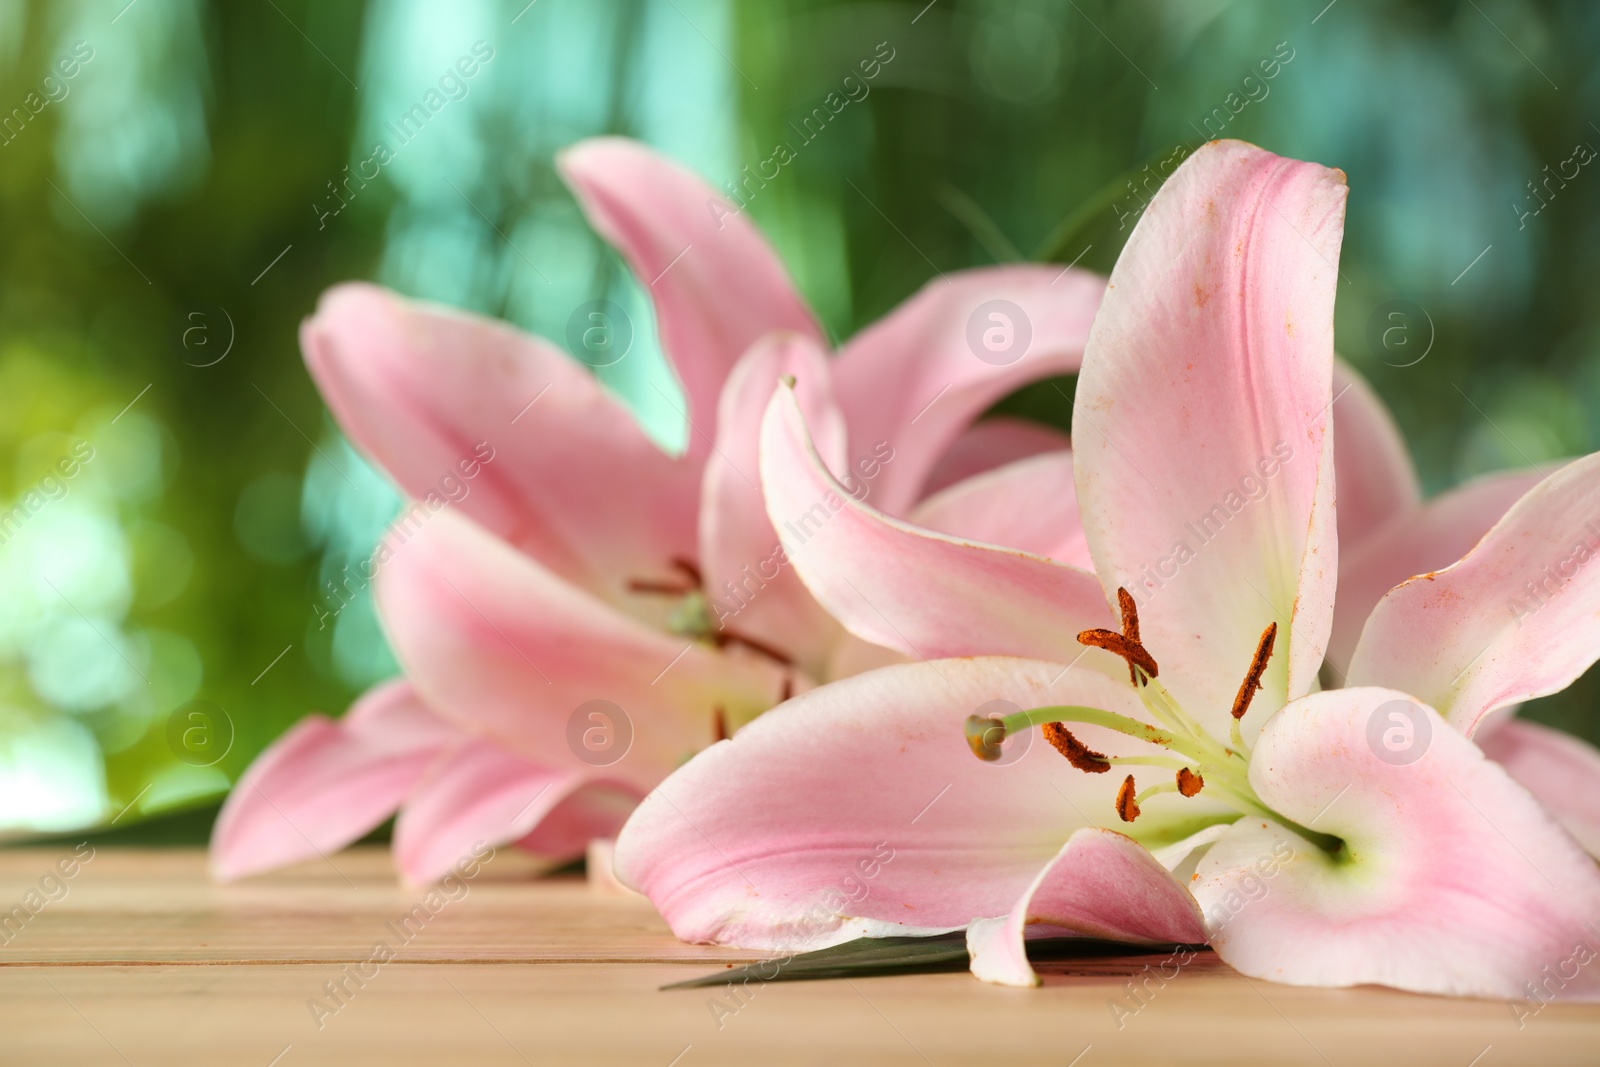 Photo of Beautiful pink lily flowers on wooden table against blurred green background, closeup